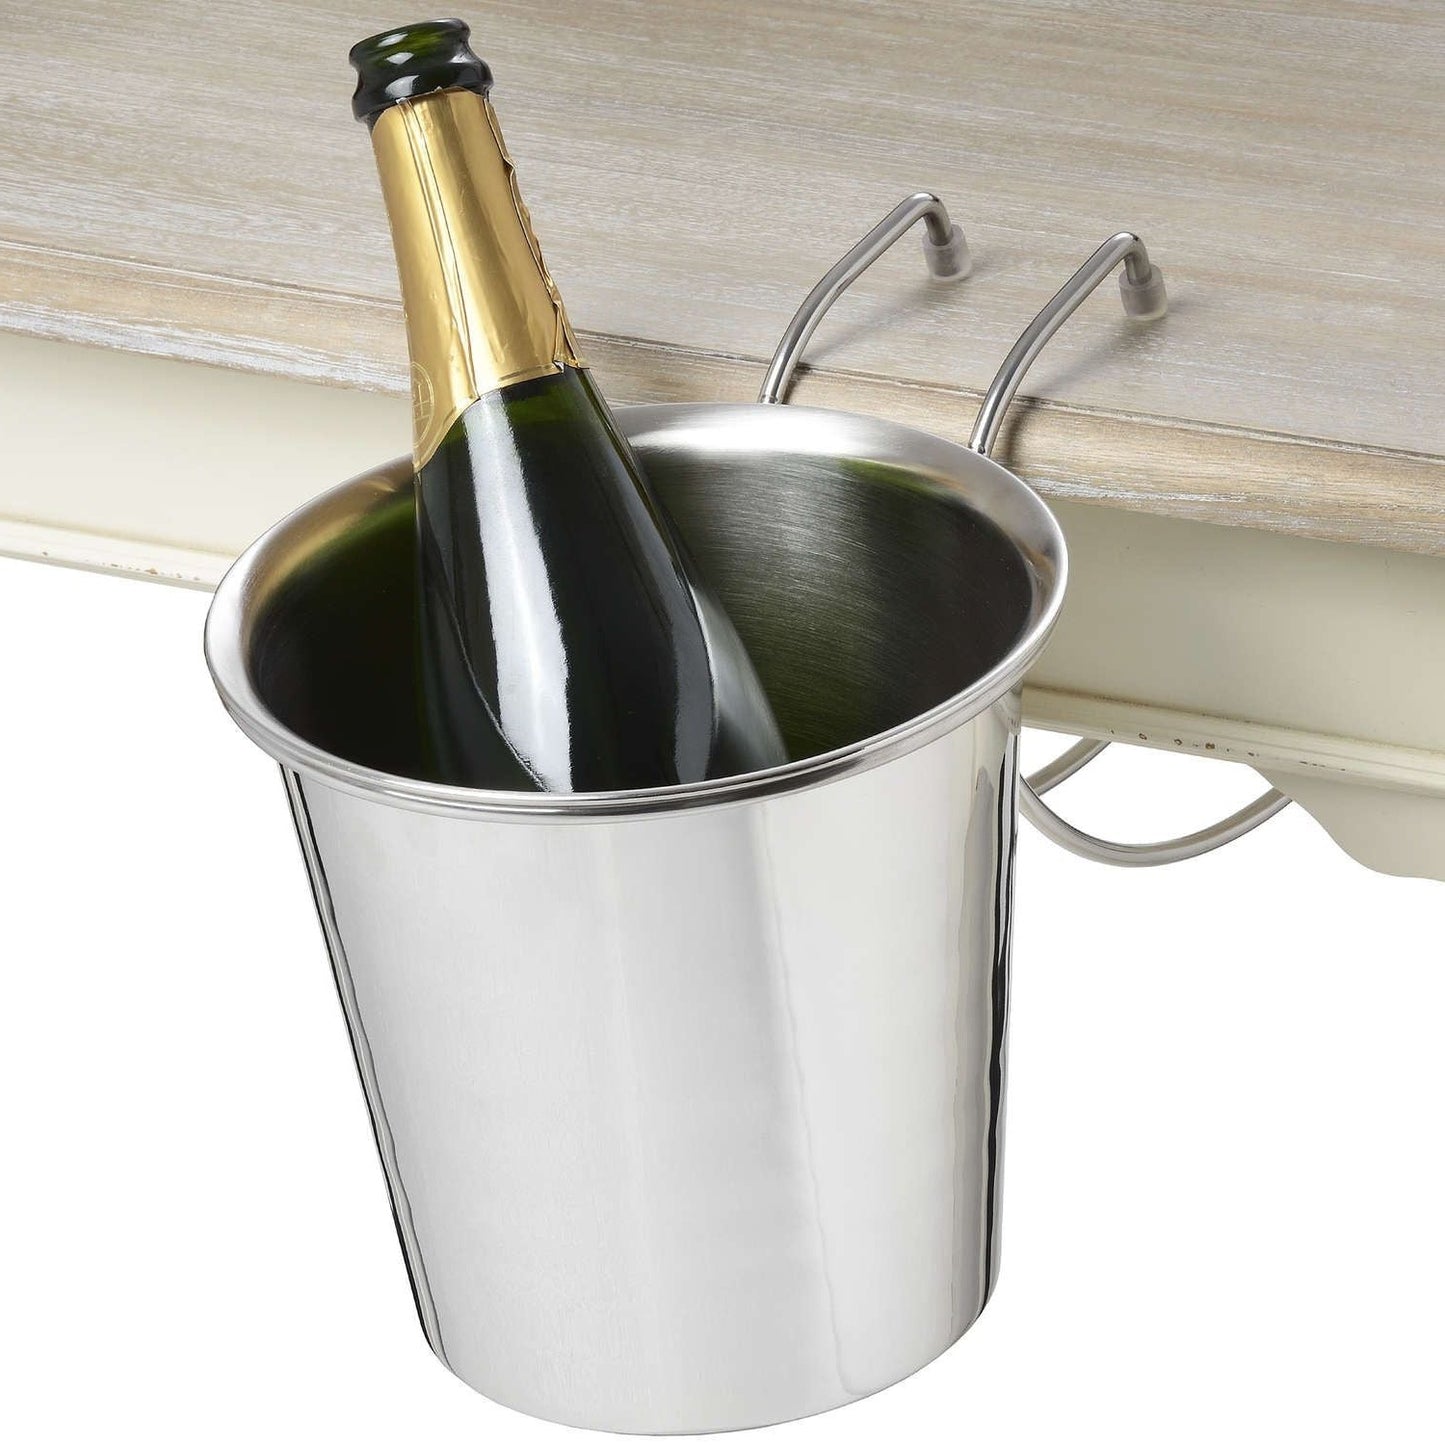 Silver champagne and wine cooler hanging bucket